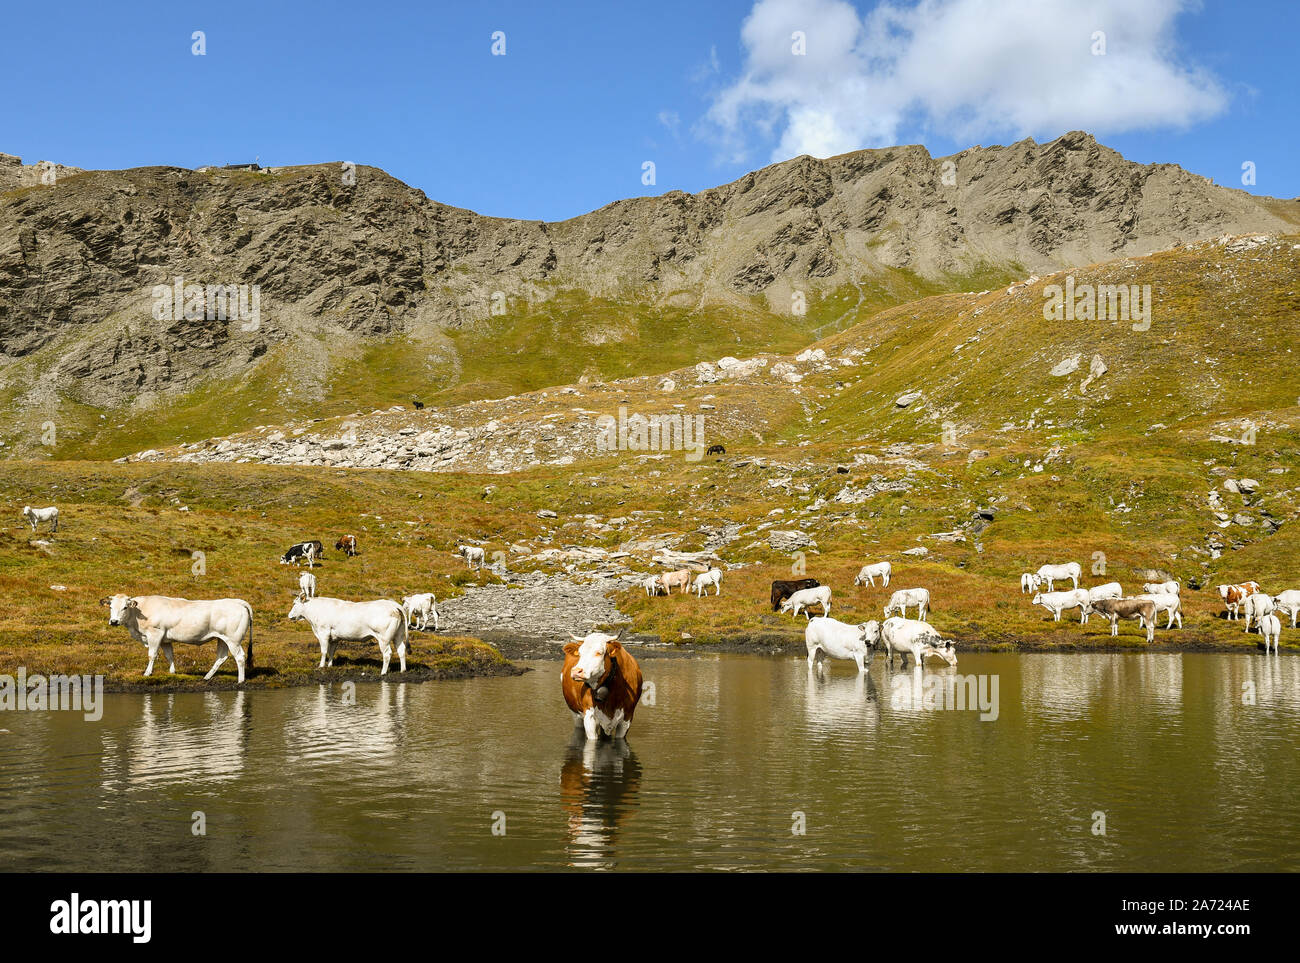 A herd of cows grazing and refreshing on the shore of Pic d'Asti Lake in Colle dell'Agnello mountain pass in late summer, Chianale, Piedmont, Italy Stock Photo